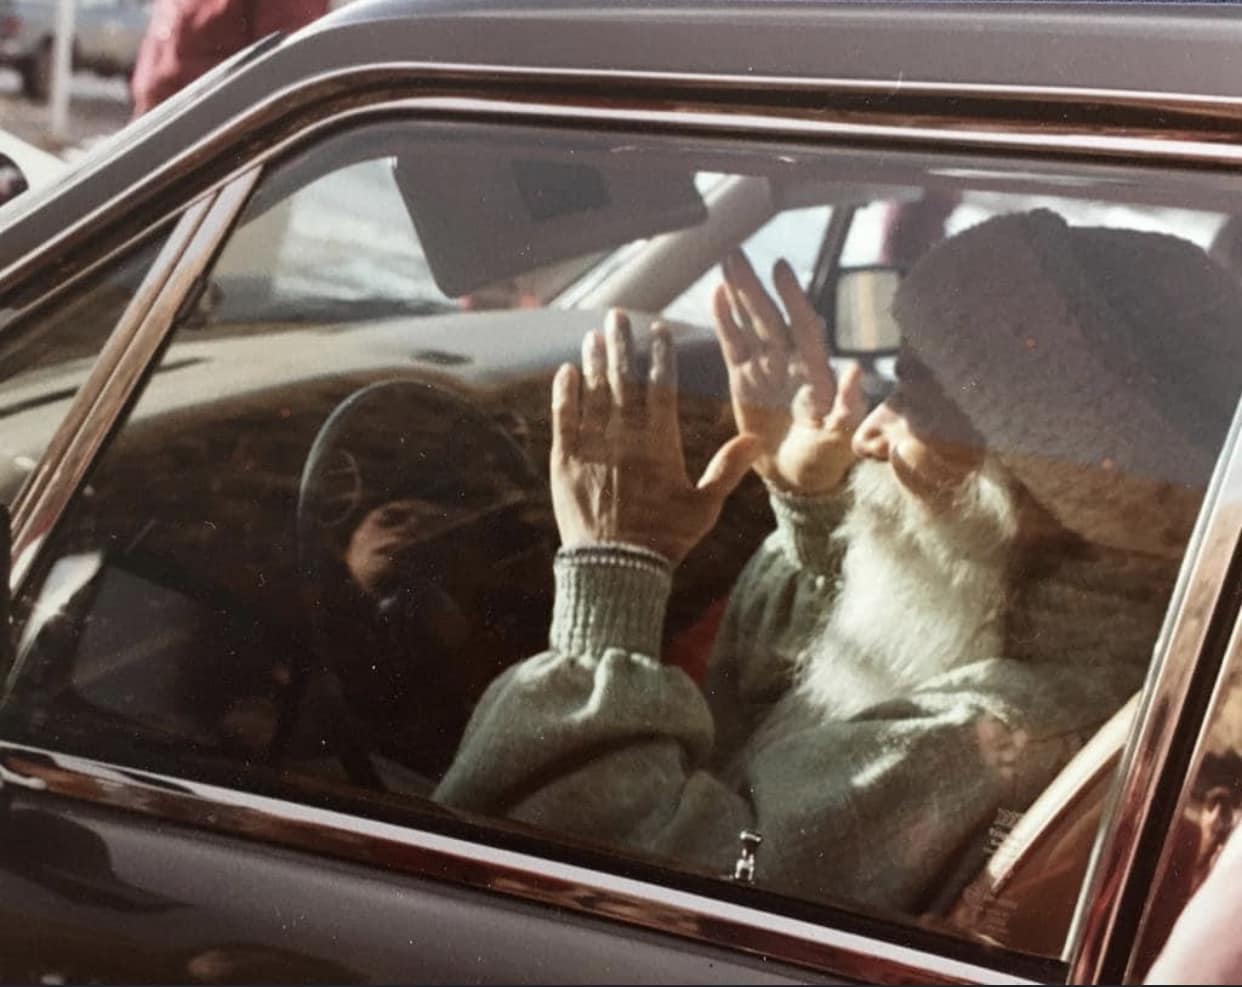 osho drive-by